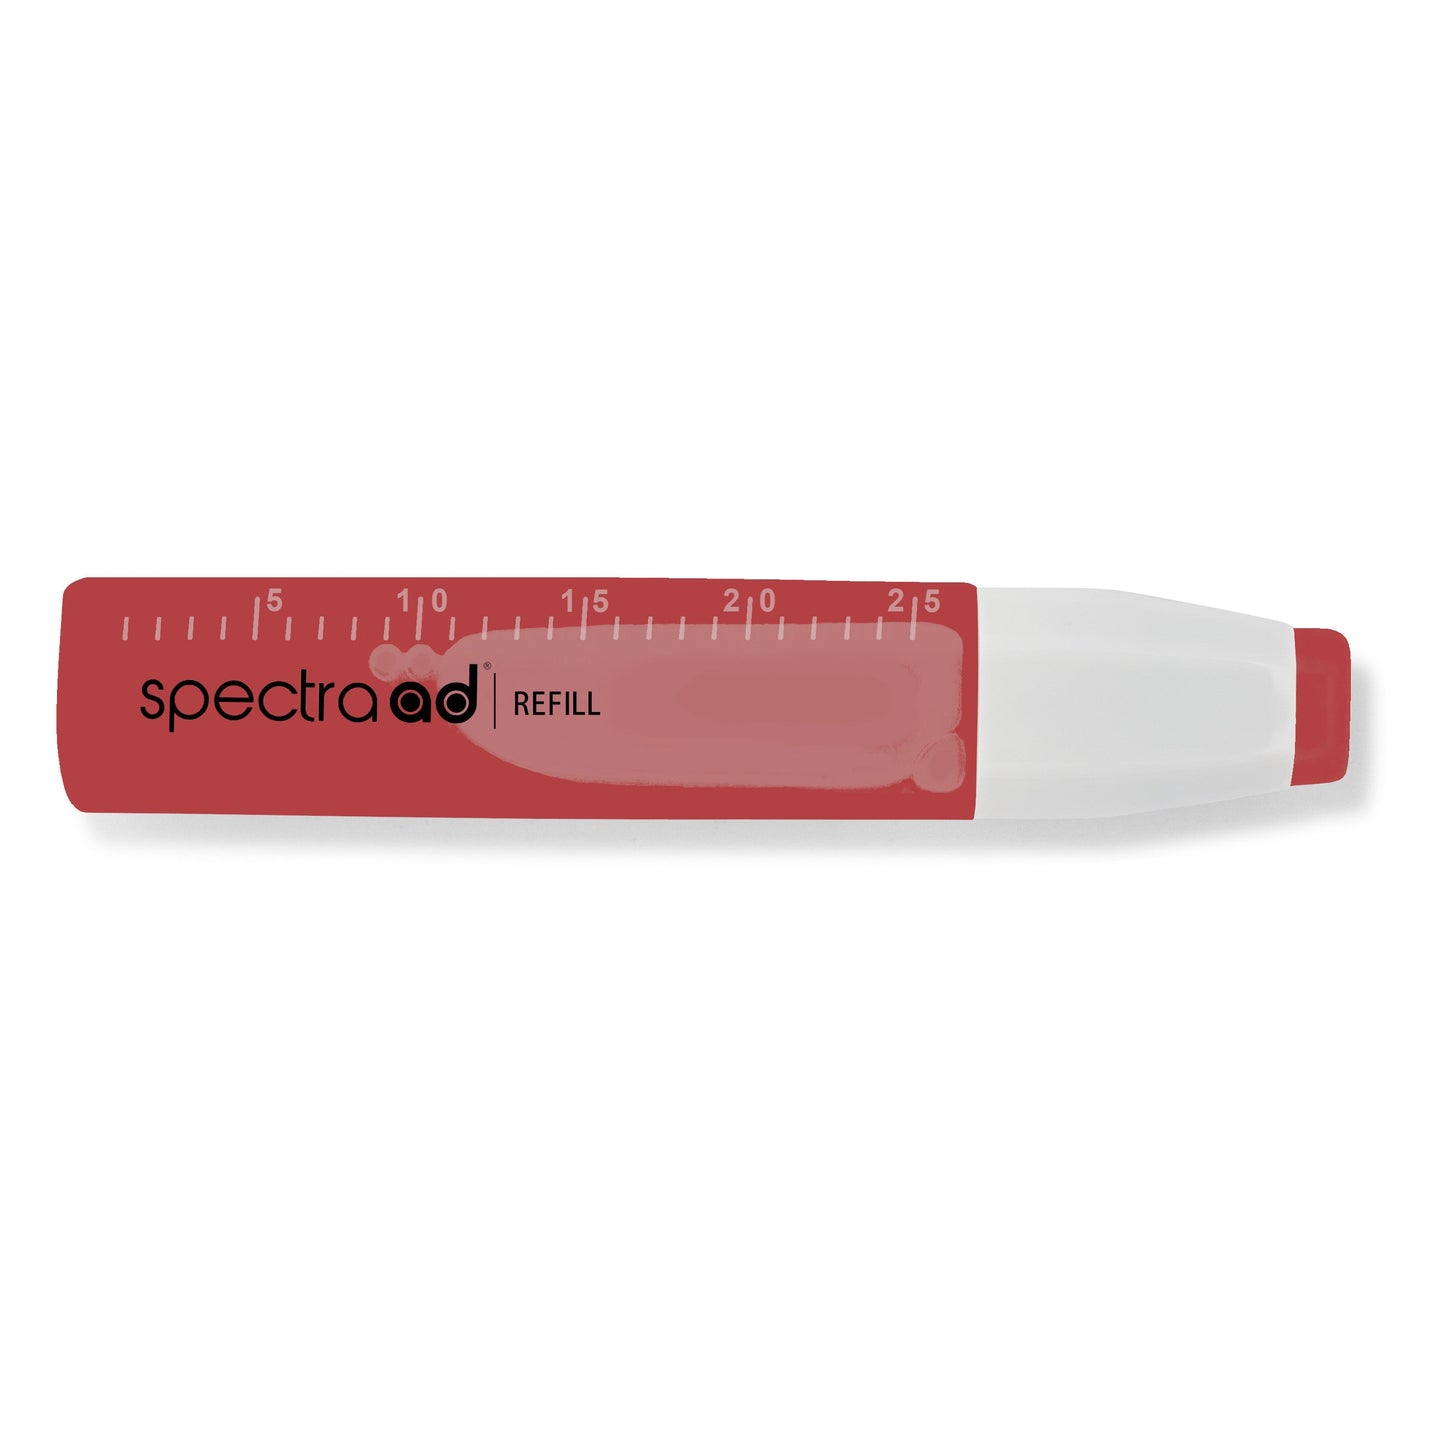 005 - Red - Spectra AD Refill Bottle